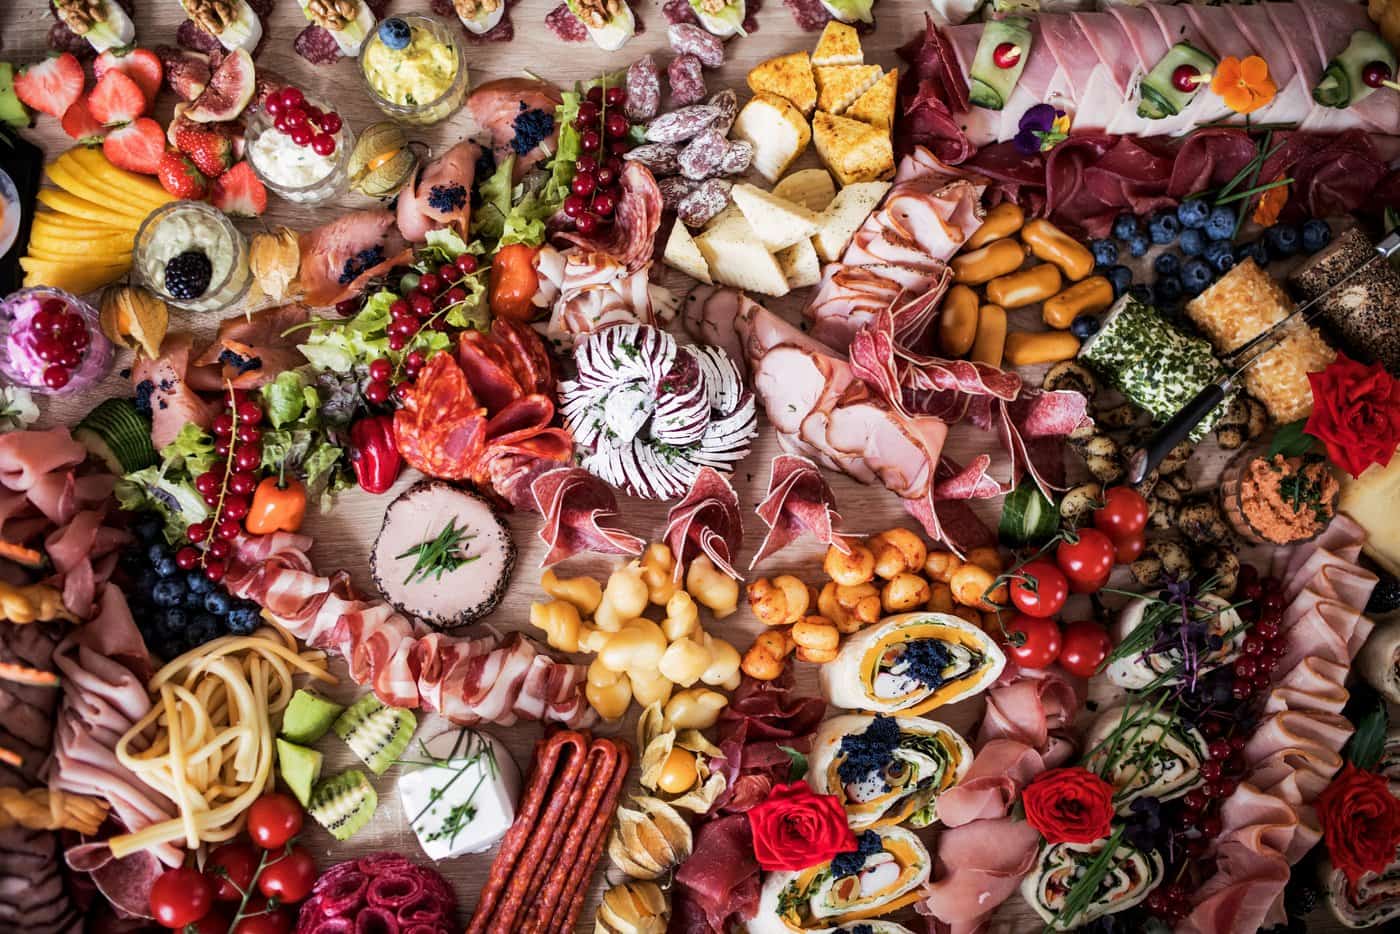 Food snacks and deli meats on a party buffet